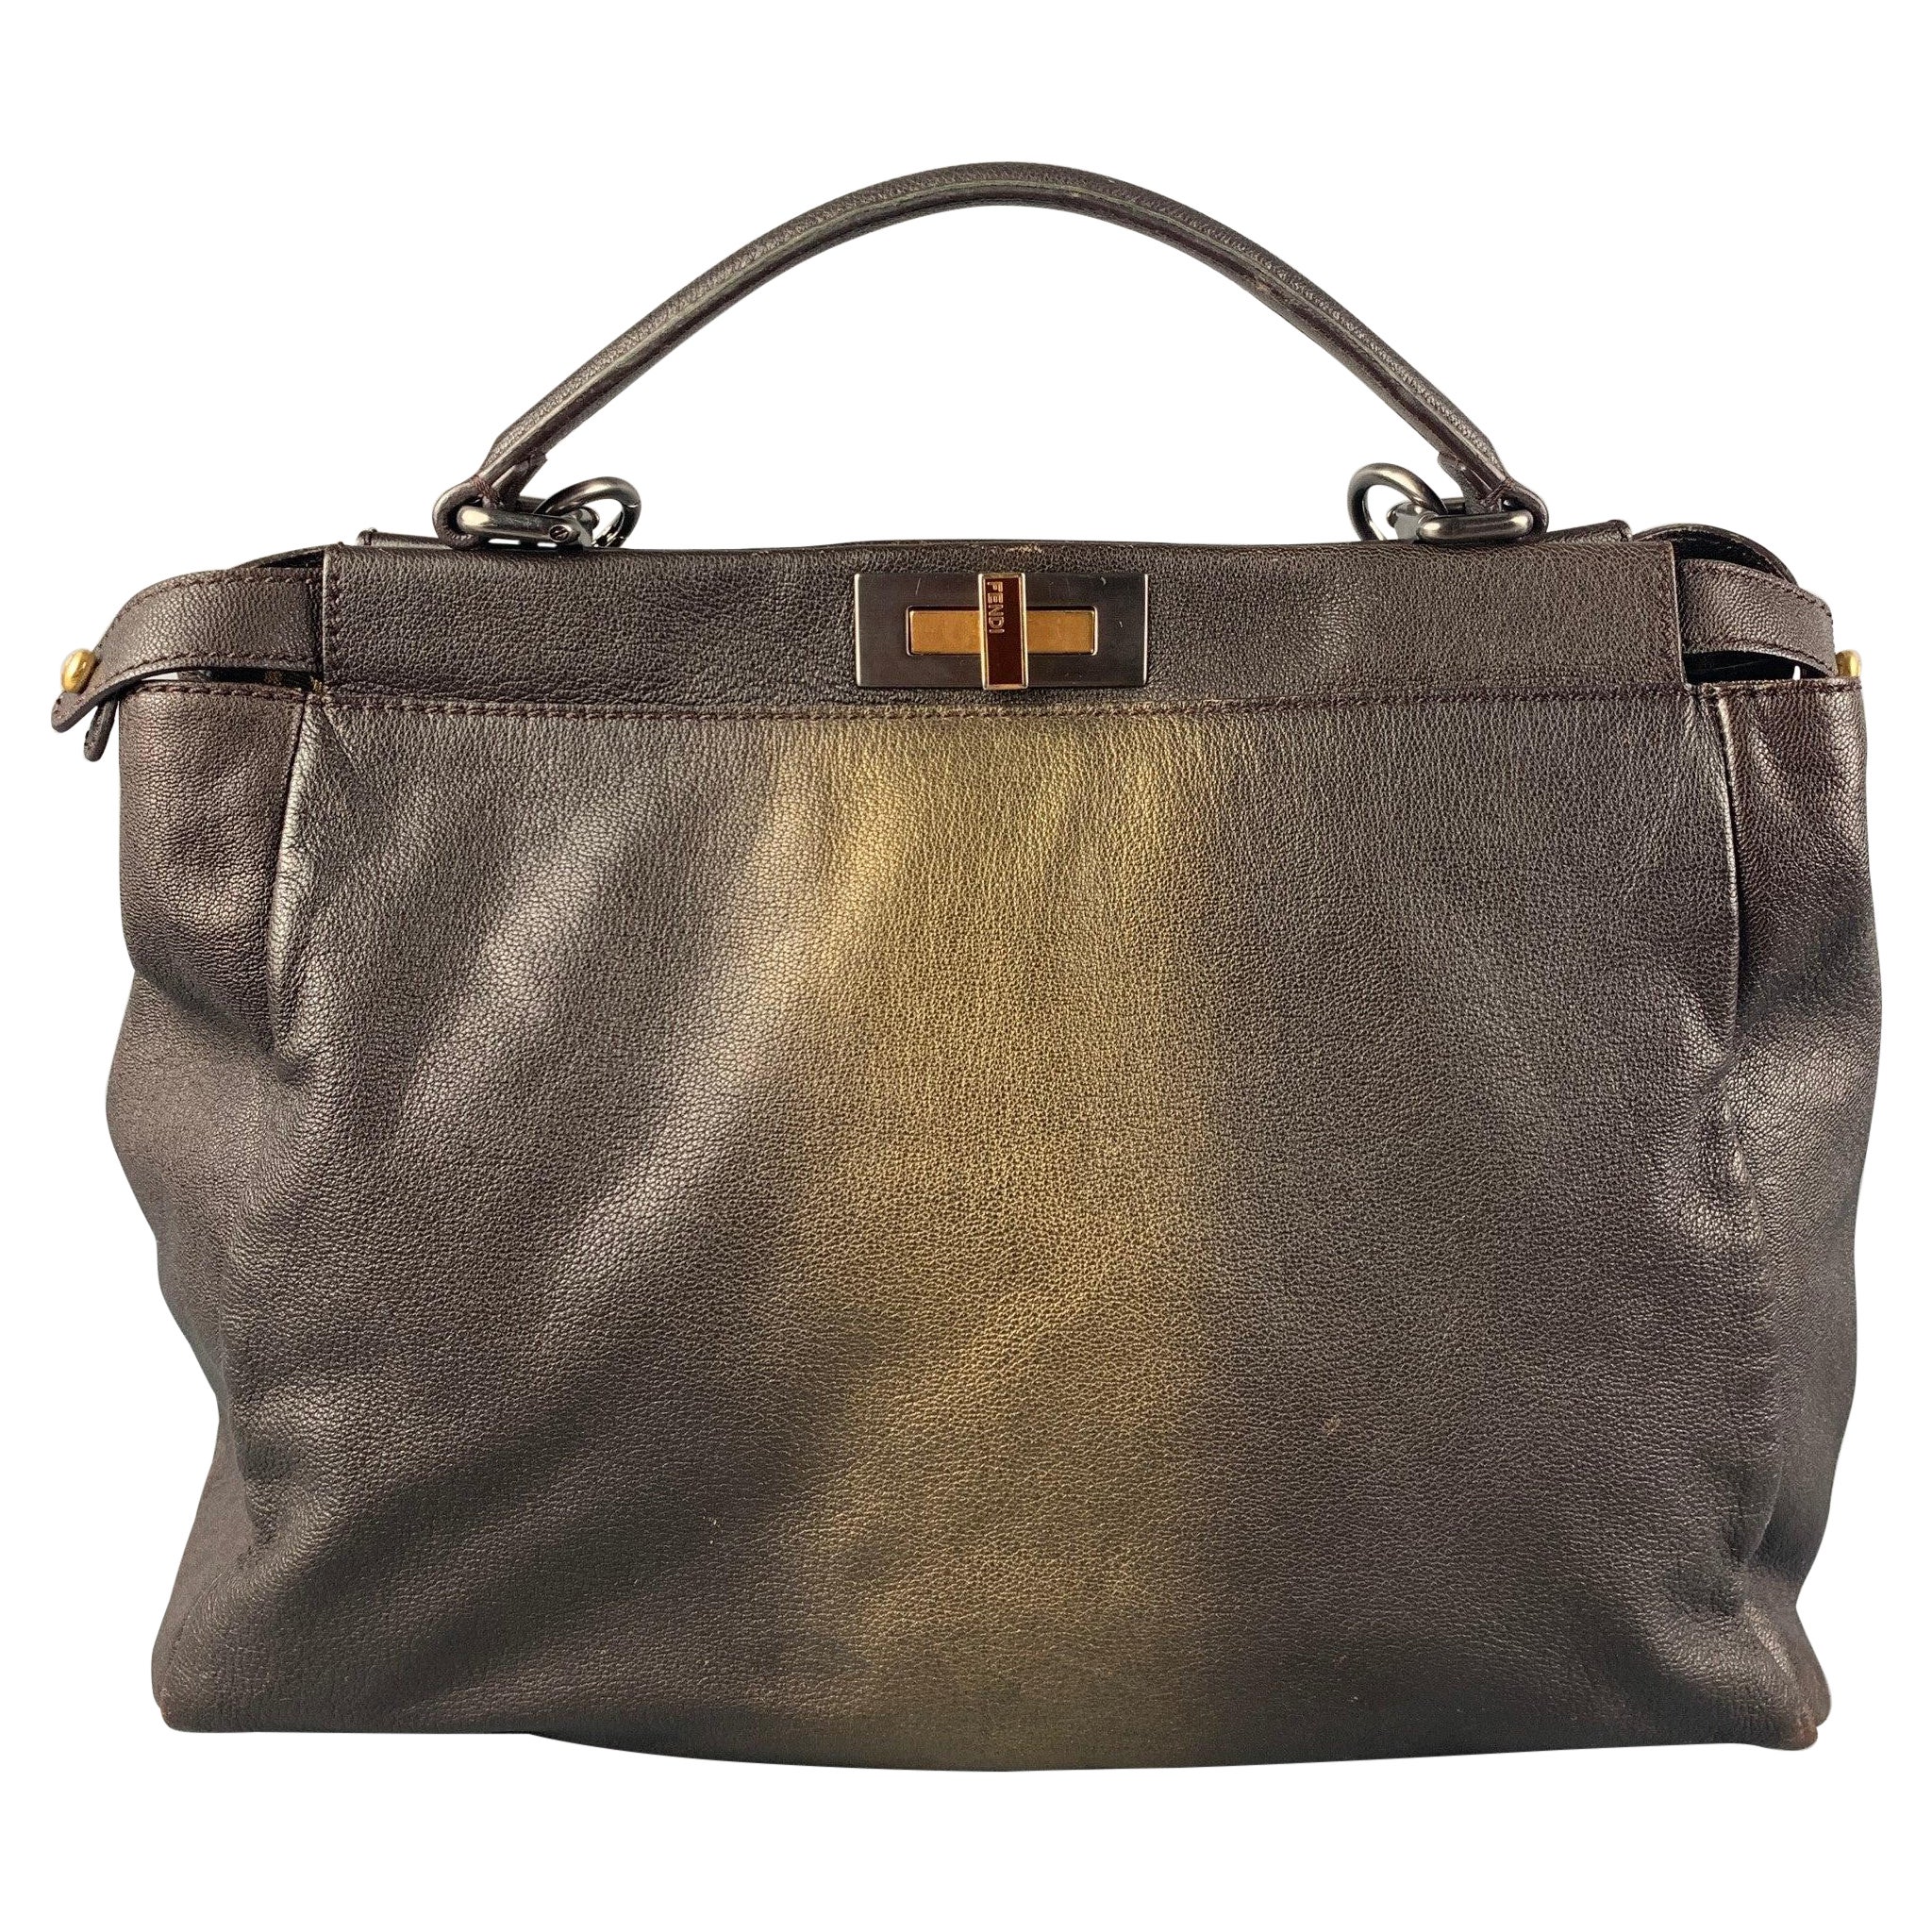 FENDI 2009 Brown Gold Ombre Leather Satchel Large Zucca Peekaboo Bag For Sale